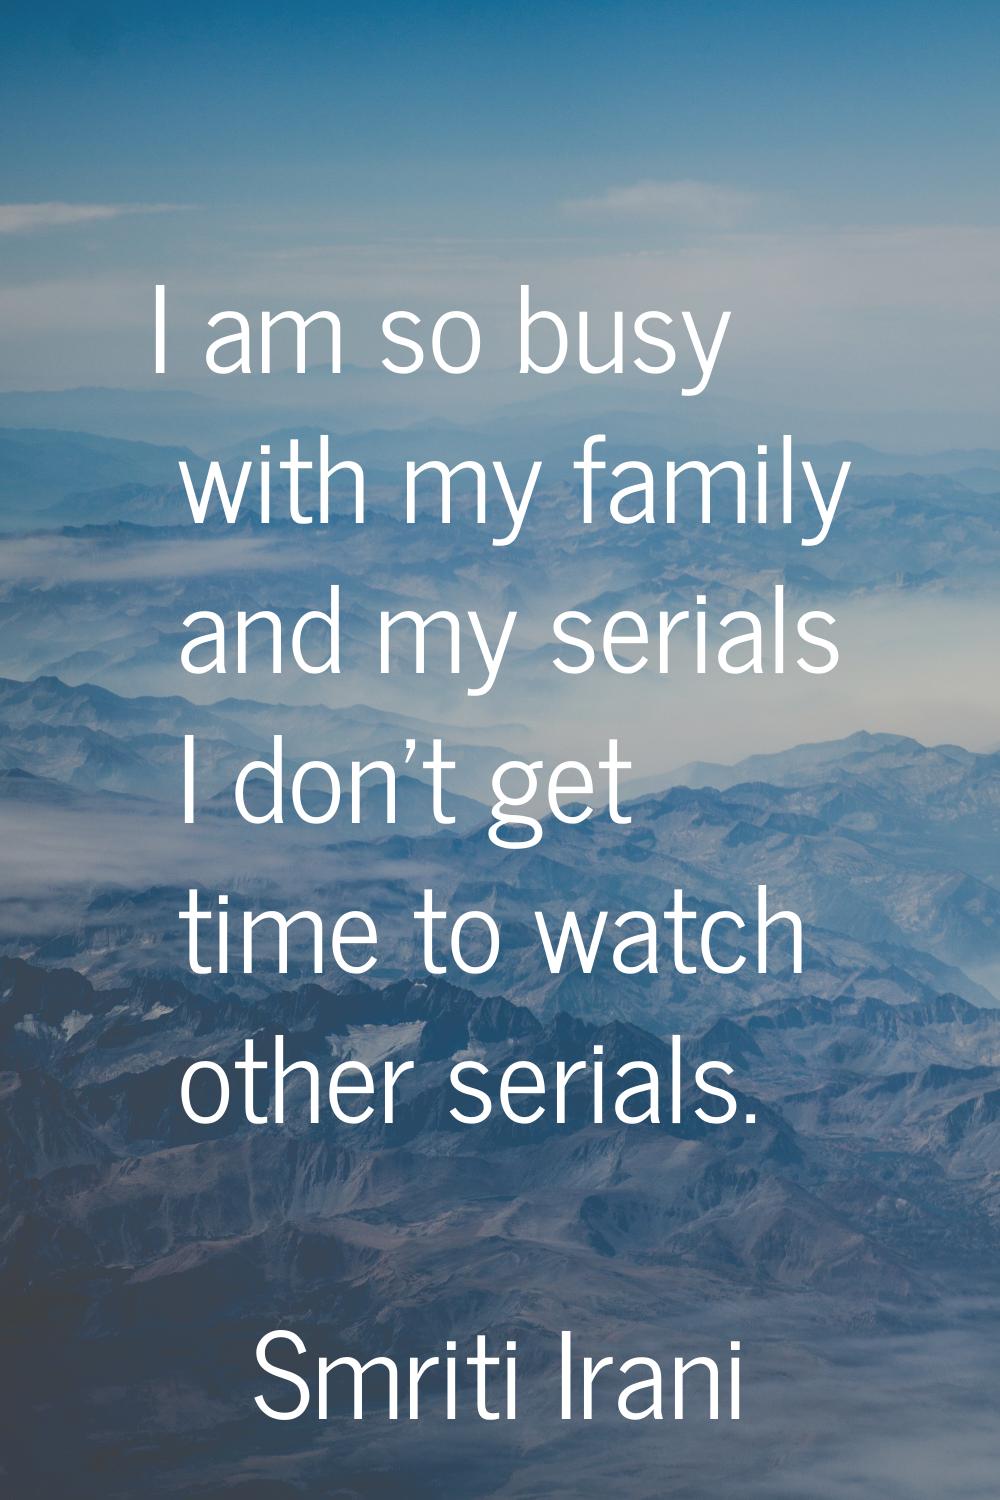 I am so busy with my family and my serials I don't get time to watch other serials.